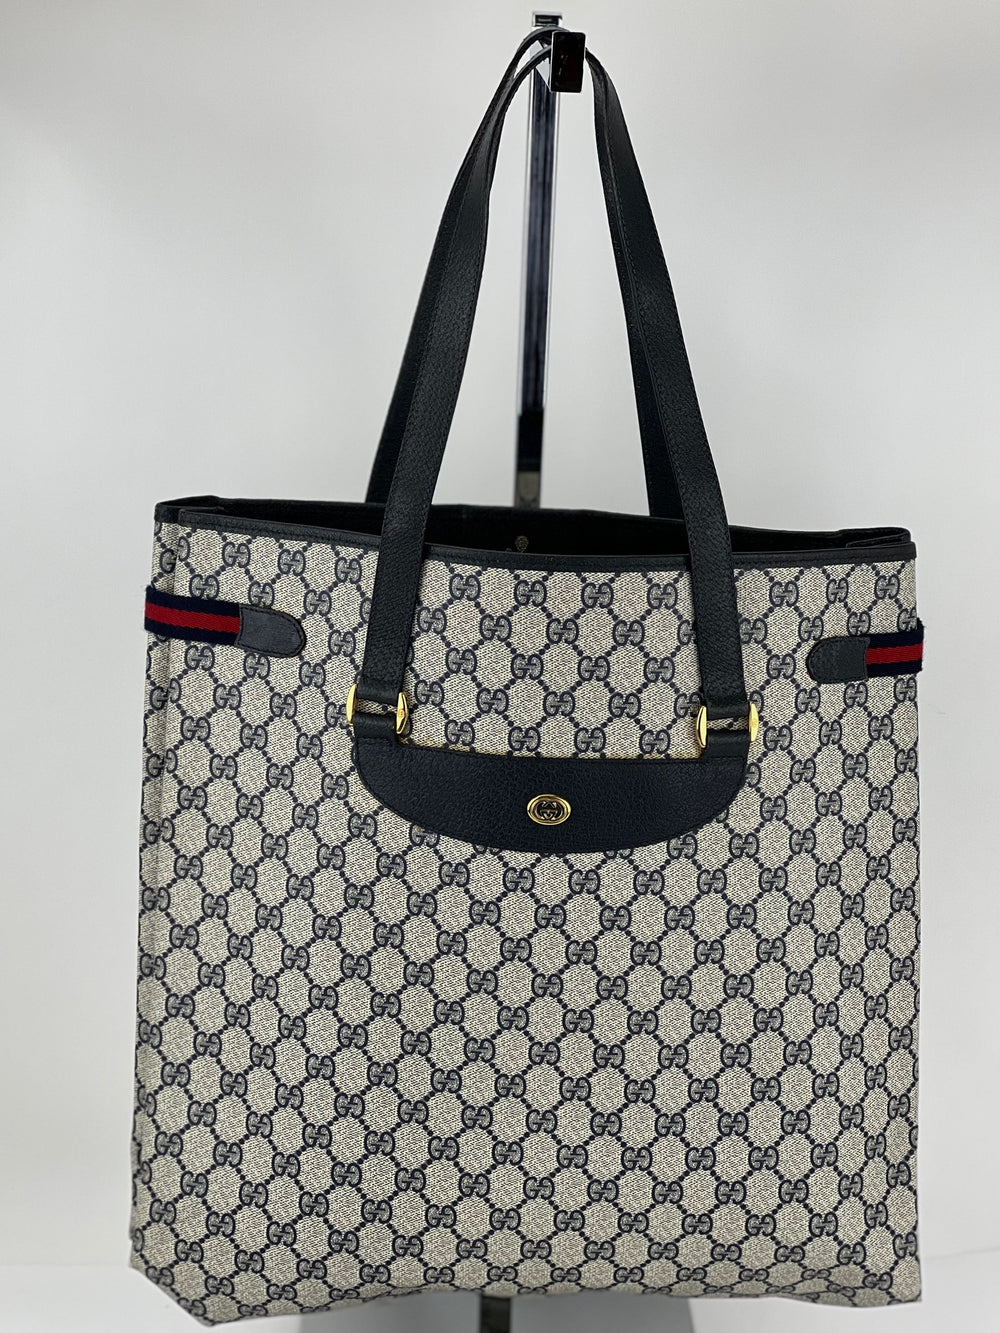 Gucci Tote GG Monogram Canvas Navy Leather trim Large Hand Tote